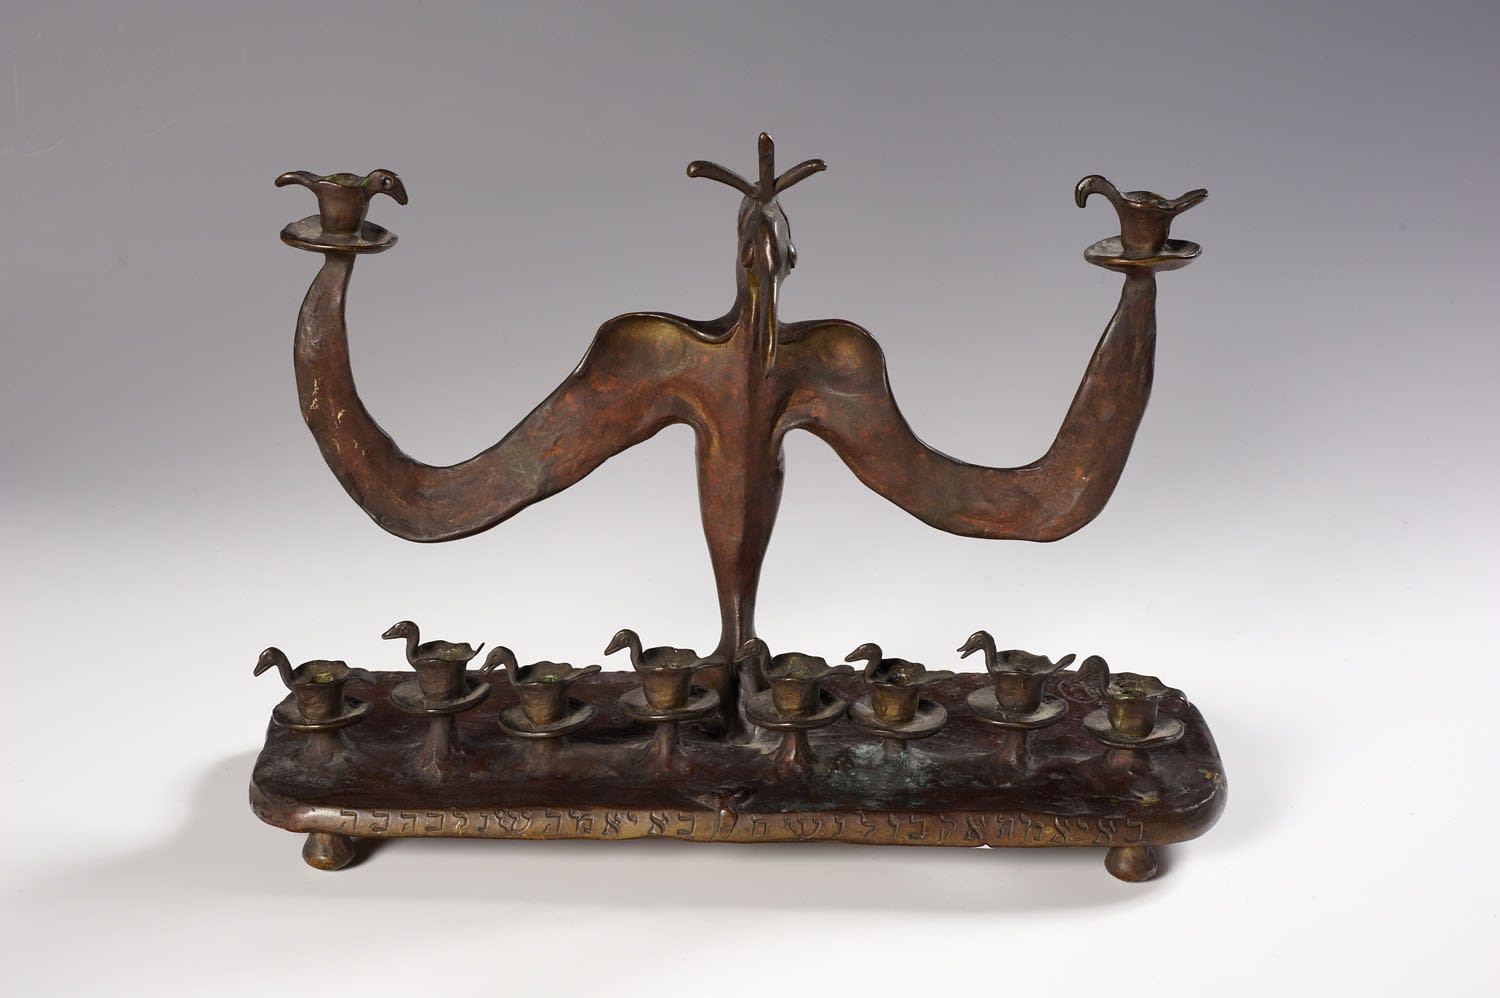 Moshe Oved (1885-1958) Chanukiah with Dove c.1949 Bronze 27 x 38 x 16 cm Ben Uri Collection © Moshe Oved estate To see and discover more about this artist click here